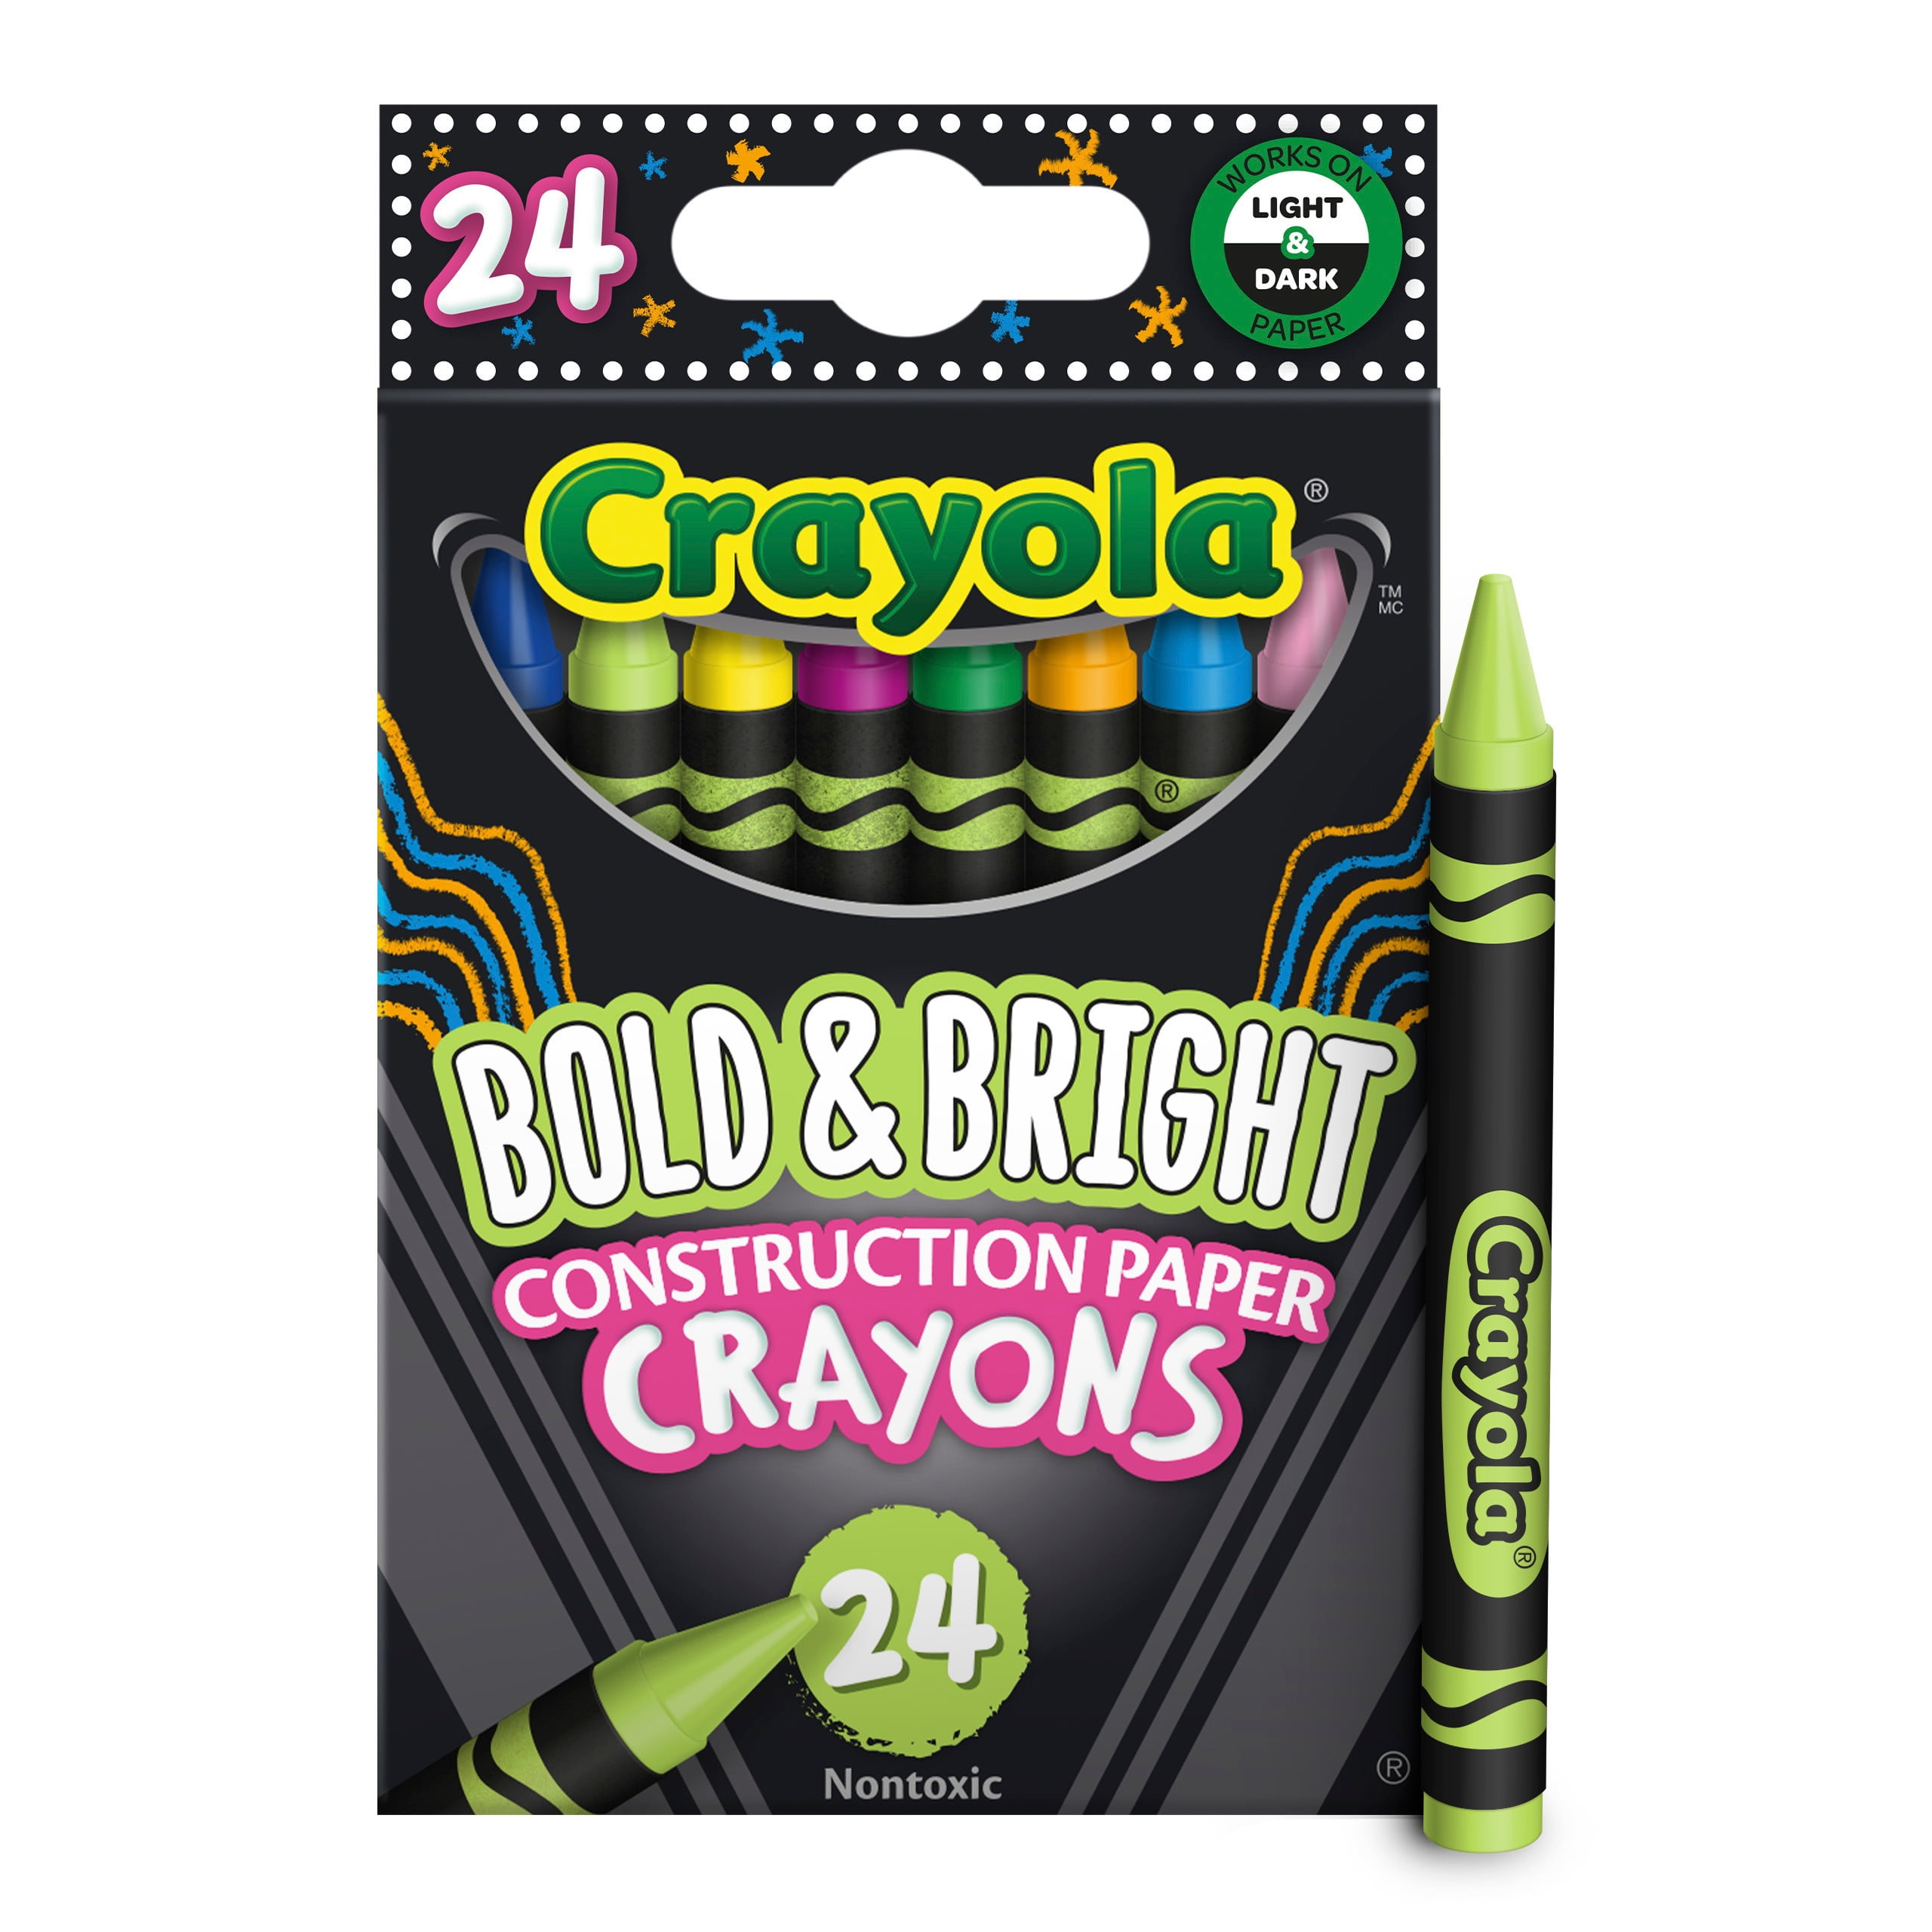 Crayola Spiderman Beyond Amazing, Art with Edge, Adult Coloring, Gift for Teens & Adults